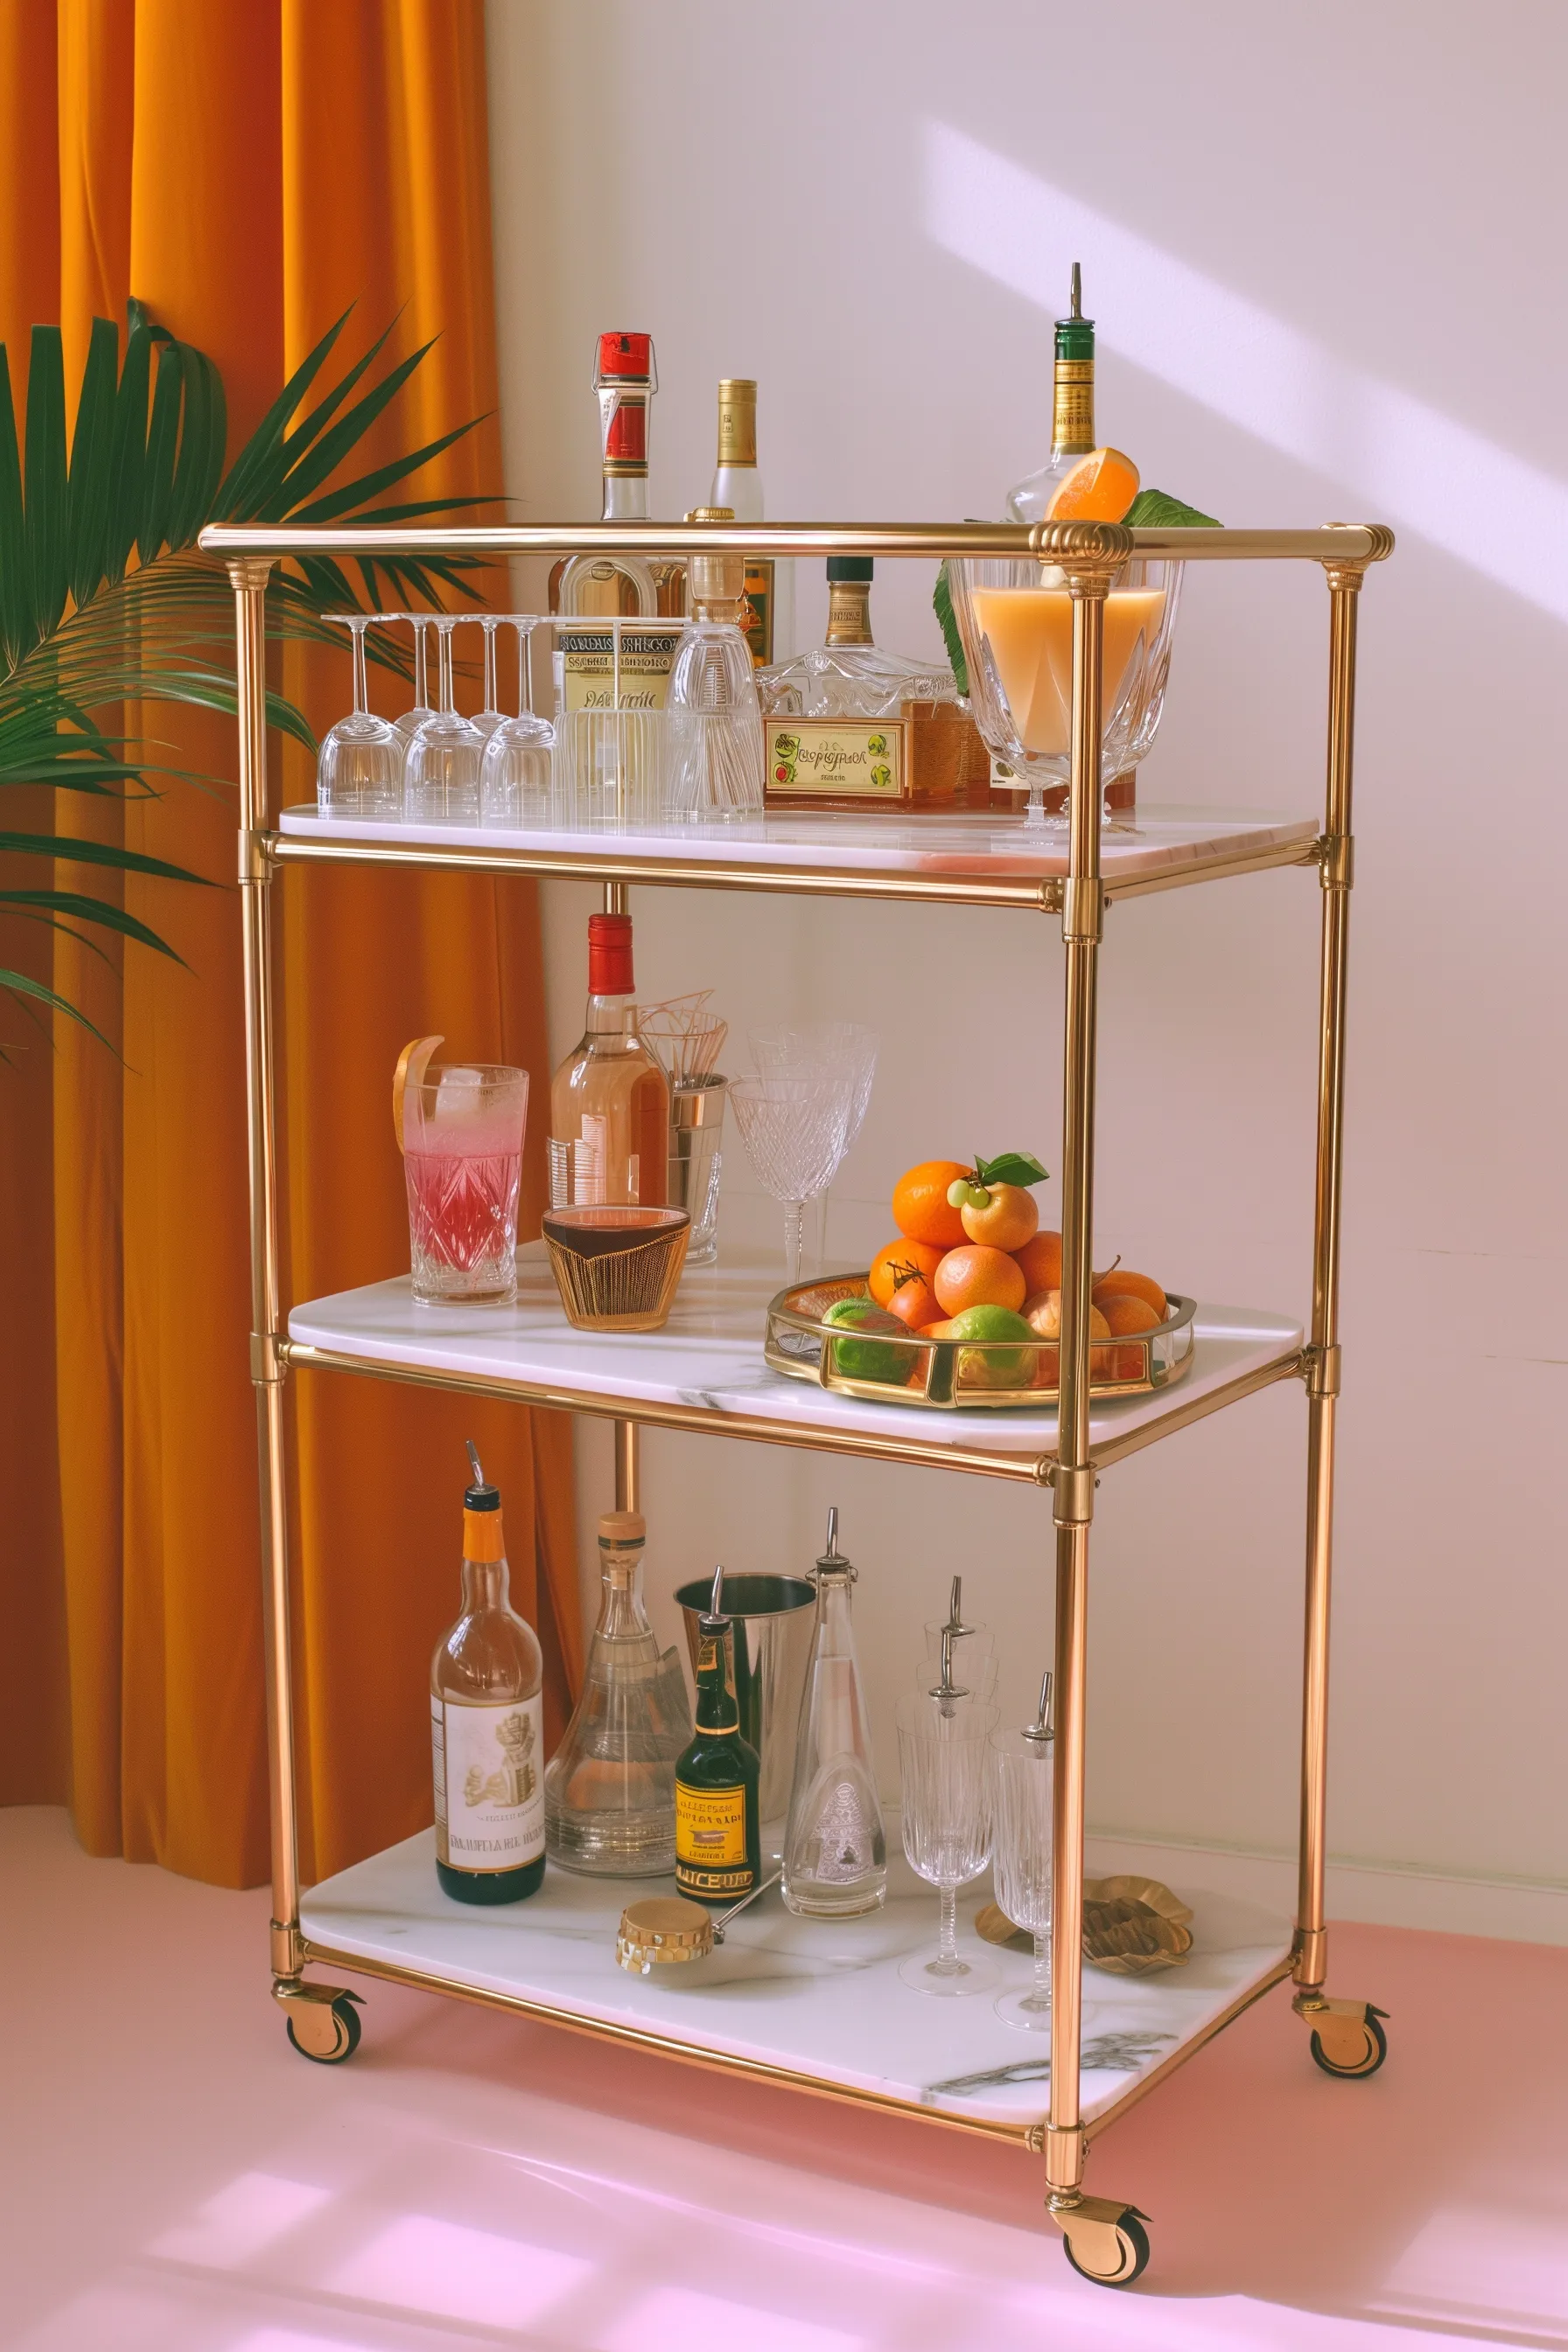 A cute wooden and gold bar cart with plants